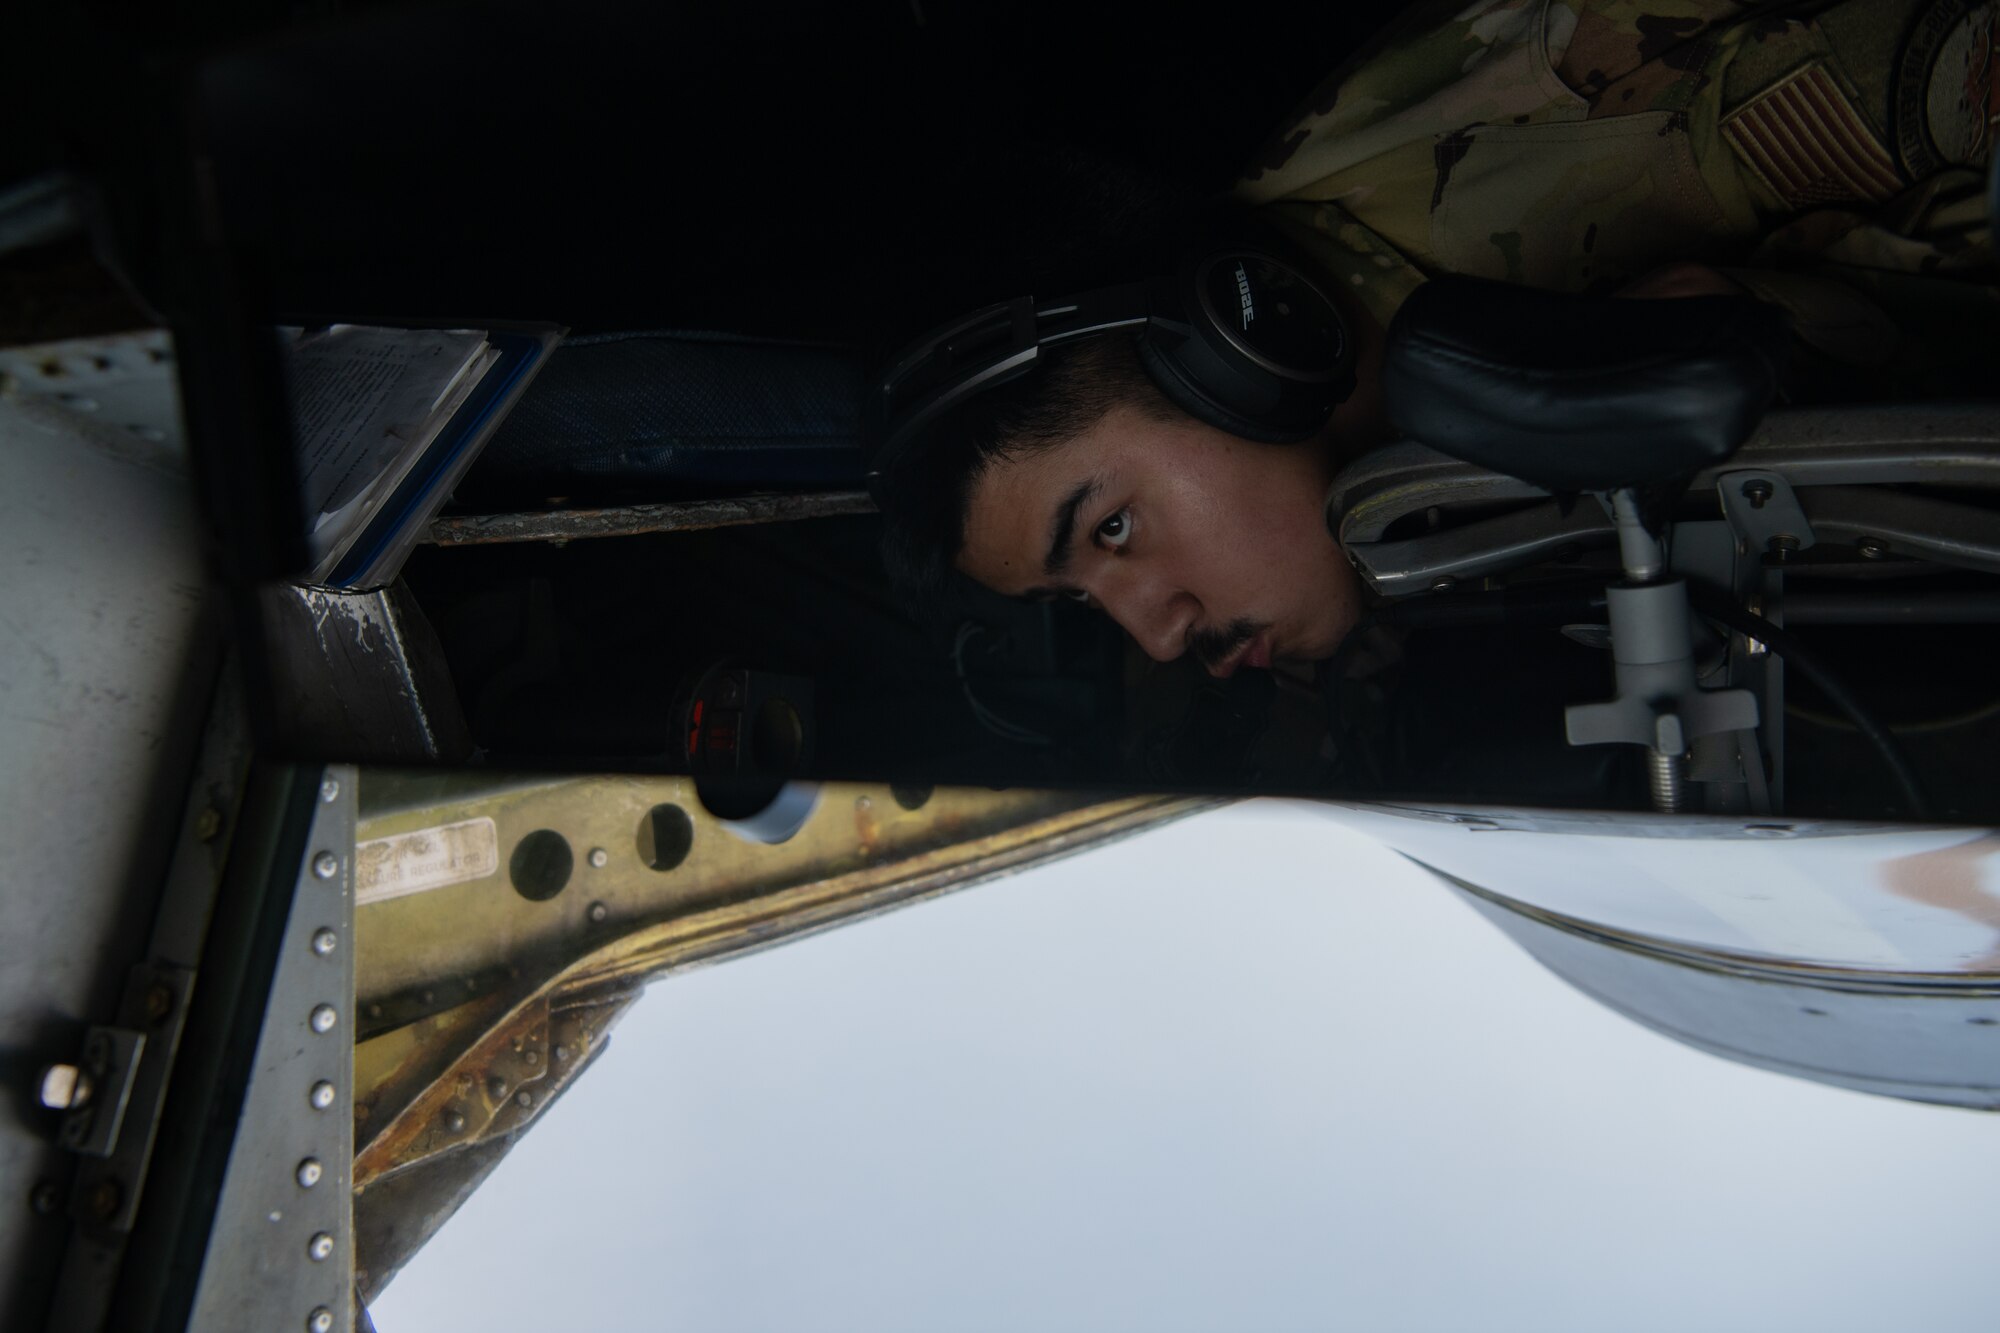 An Airman looks out a window for an aircraft.